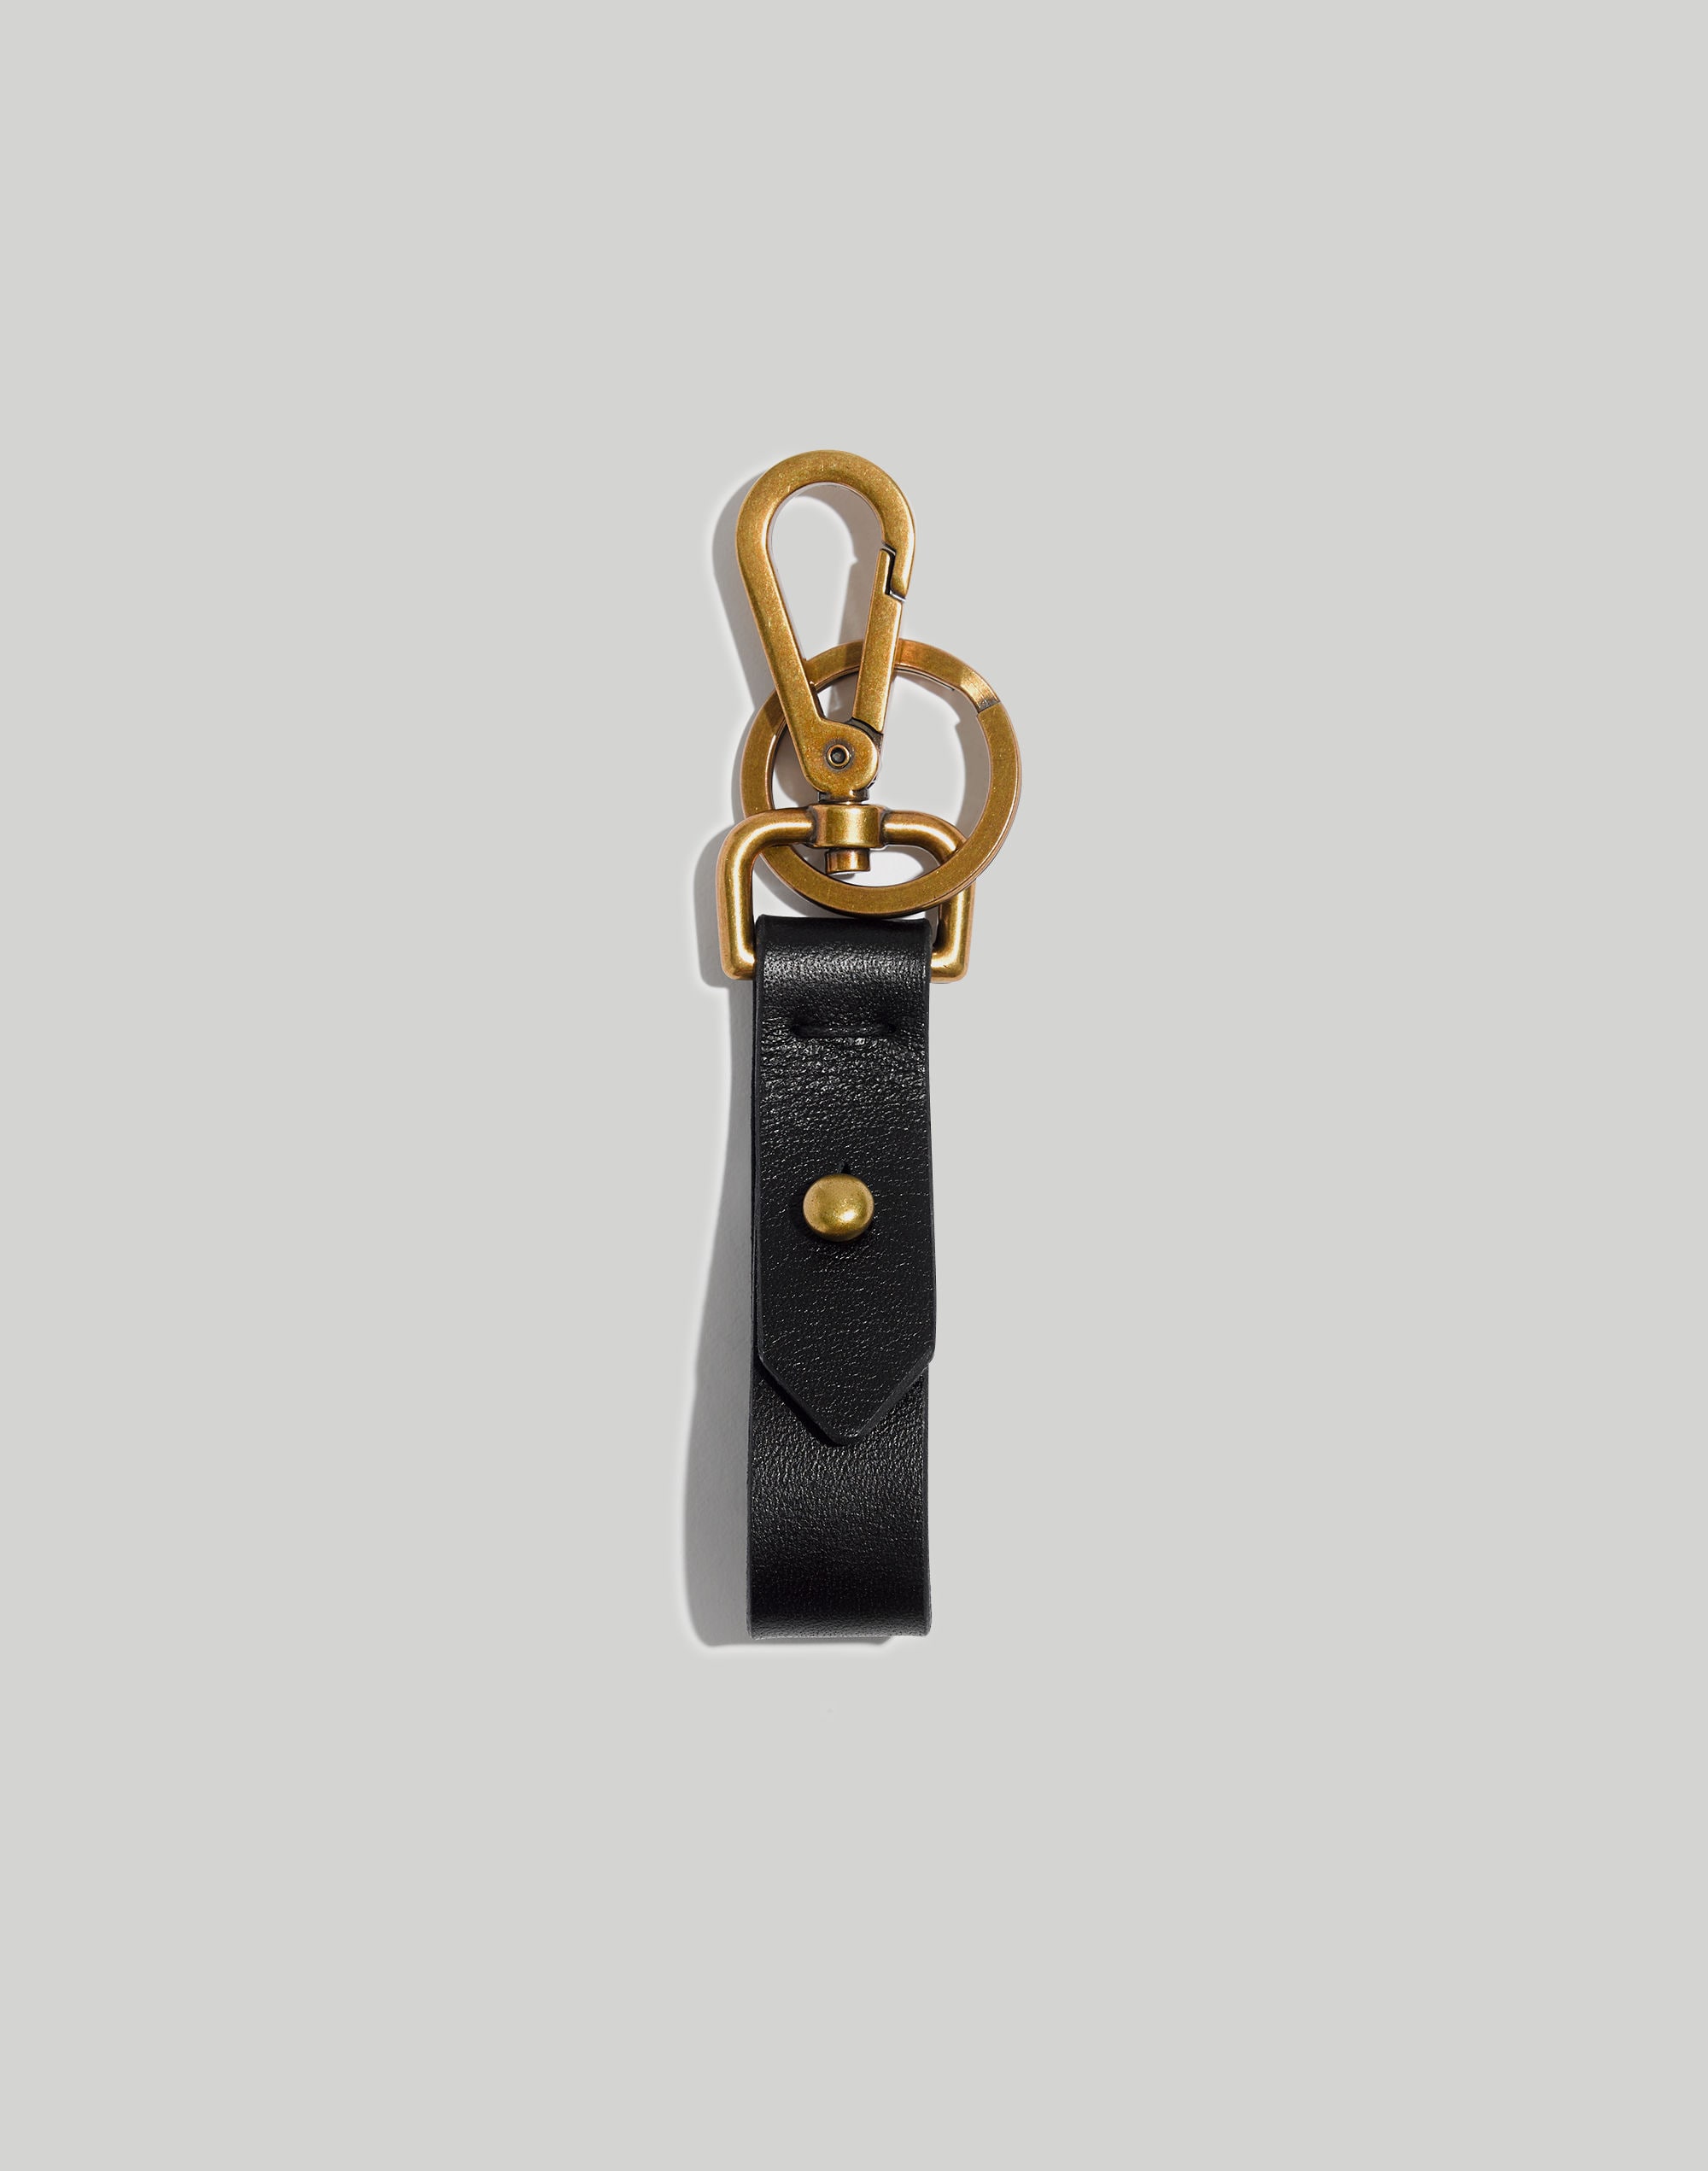 The Front Door Key Fob in Leather